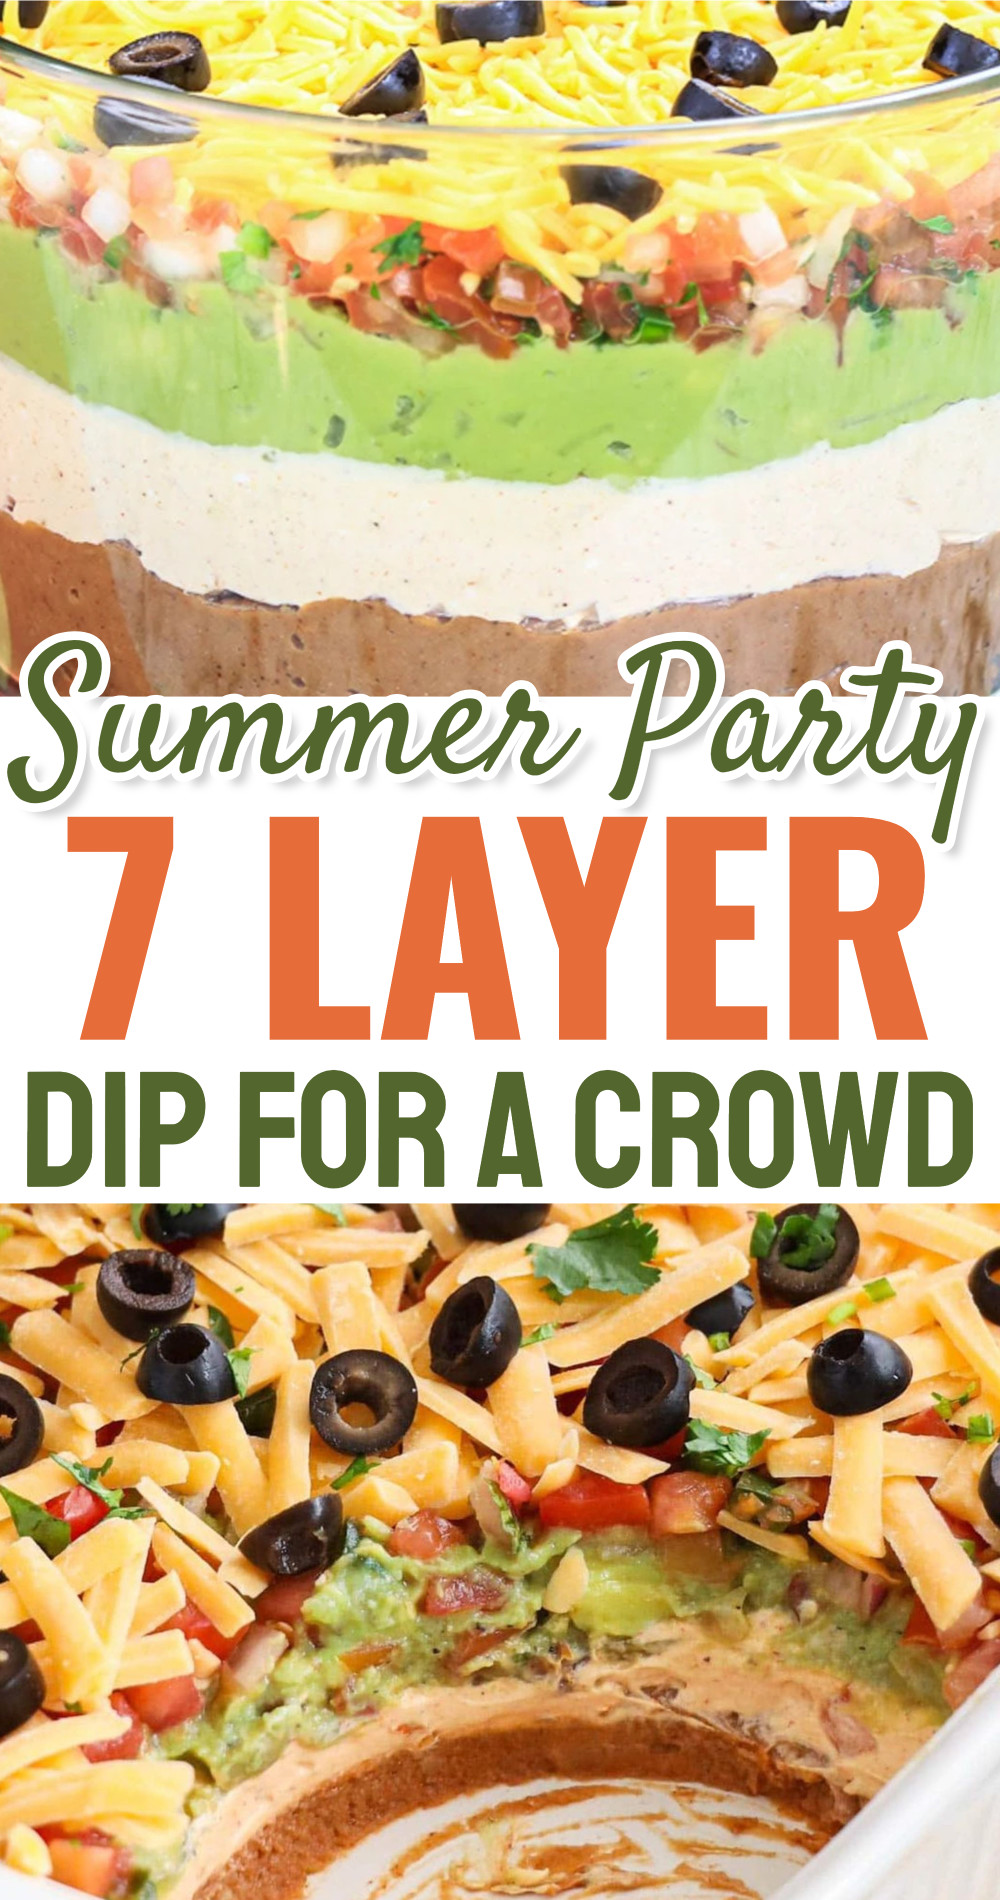 Summer party 7-layer cold dip for a crowd